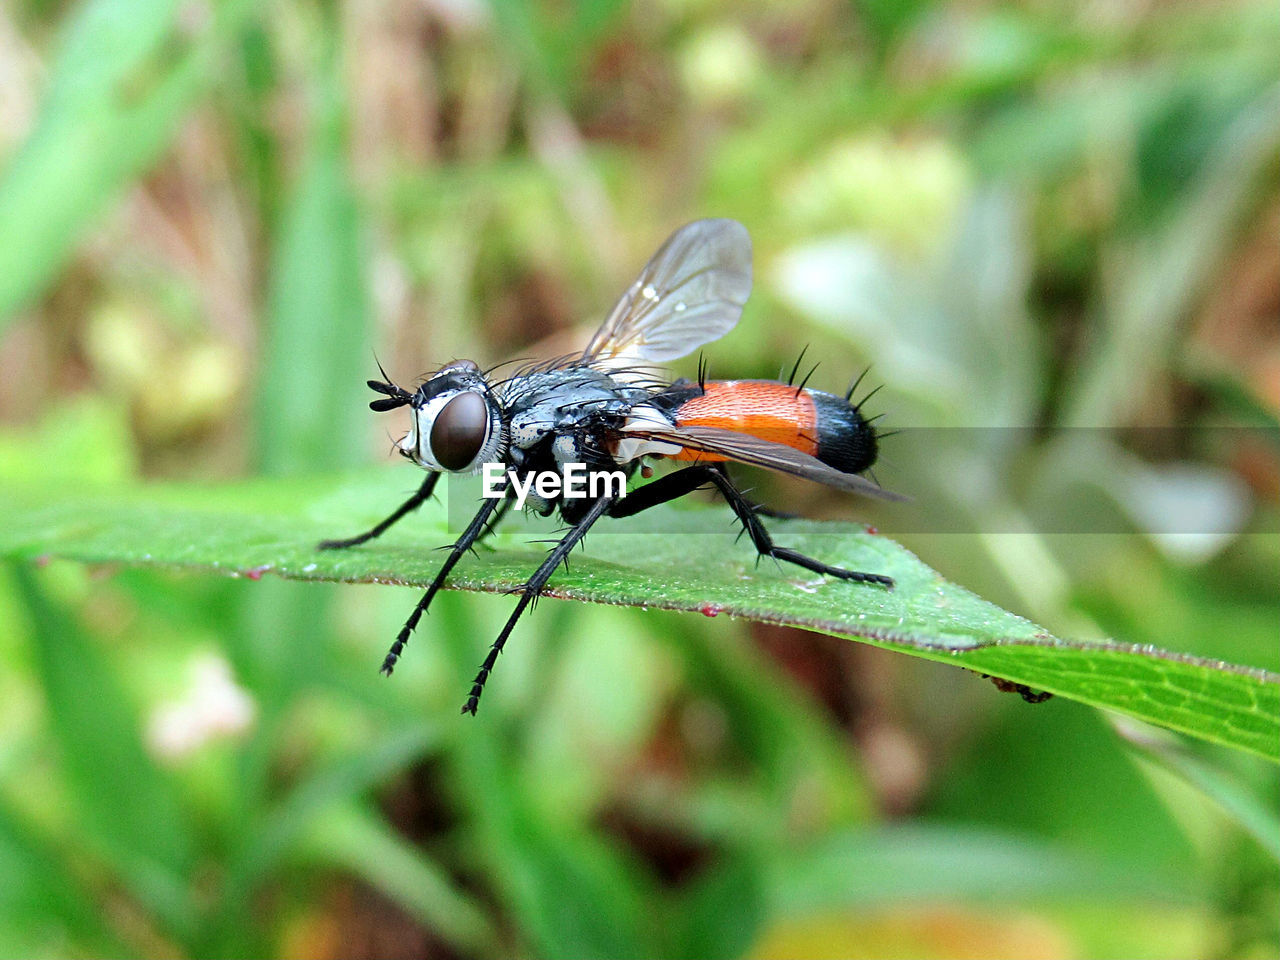 CLOSE-UP OF FLY